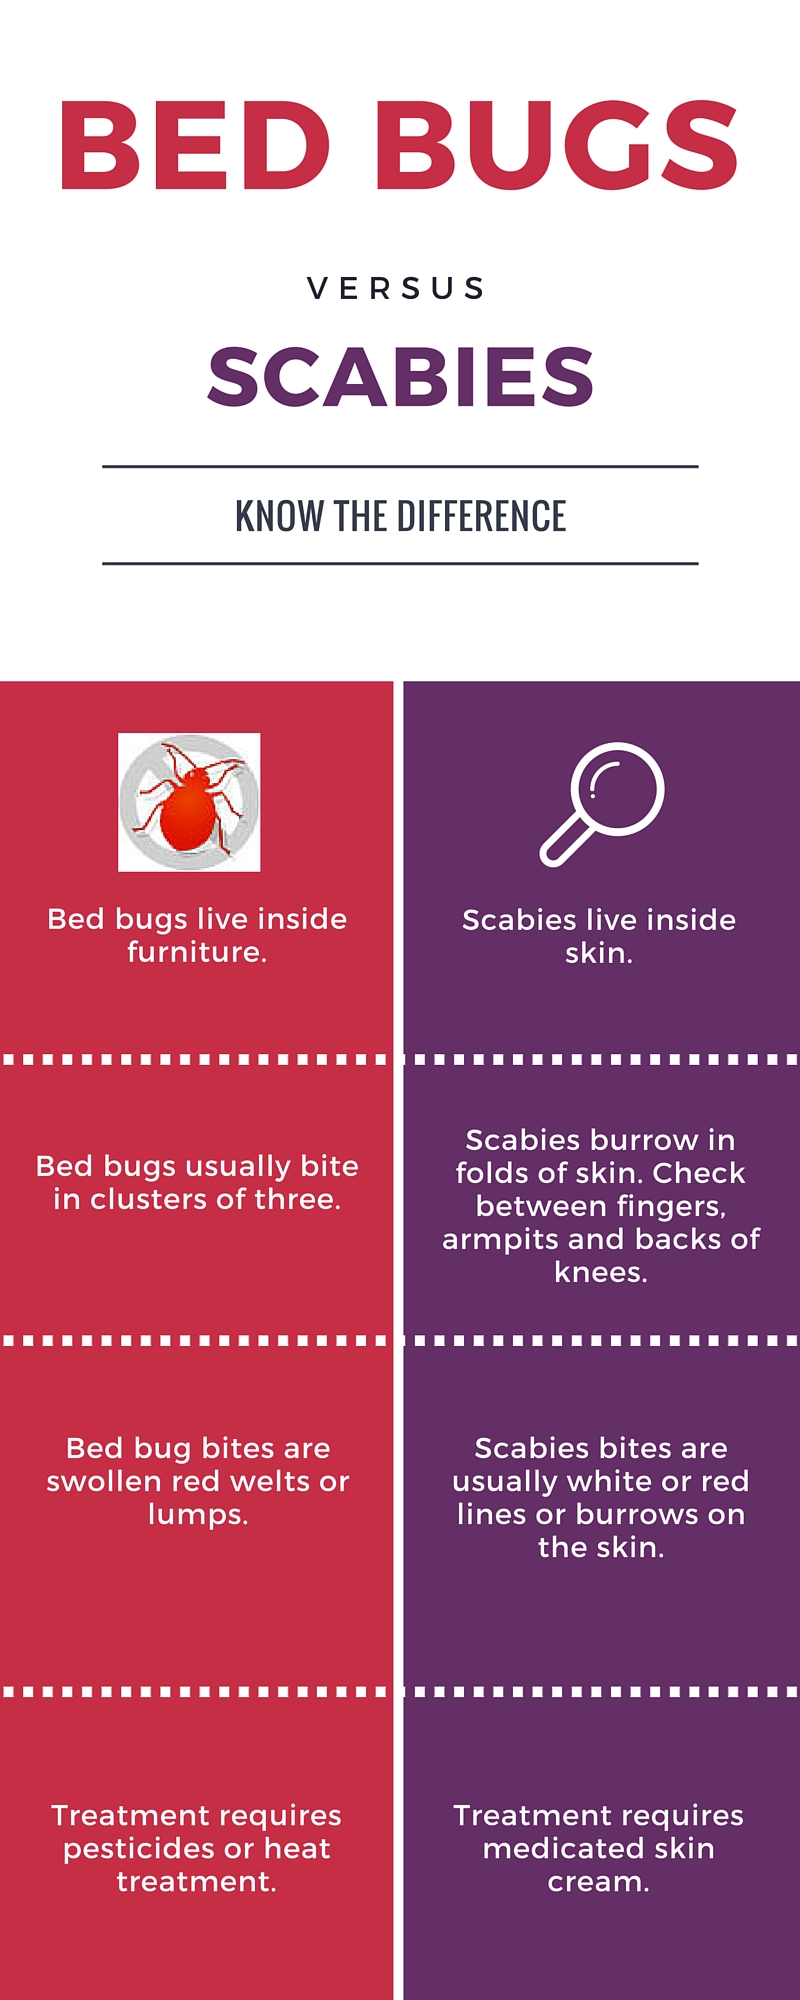 Scabies Vs Bed Bugs 6490